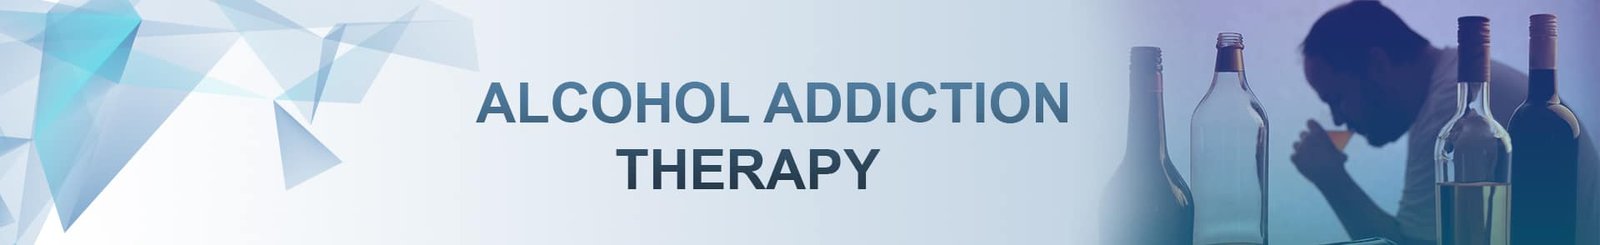 ALCOHOL ADDICTION THERAPY